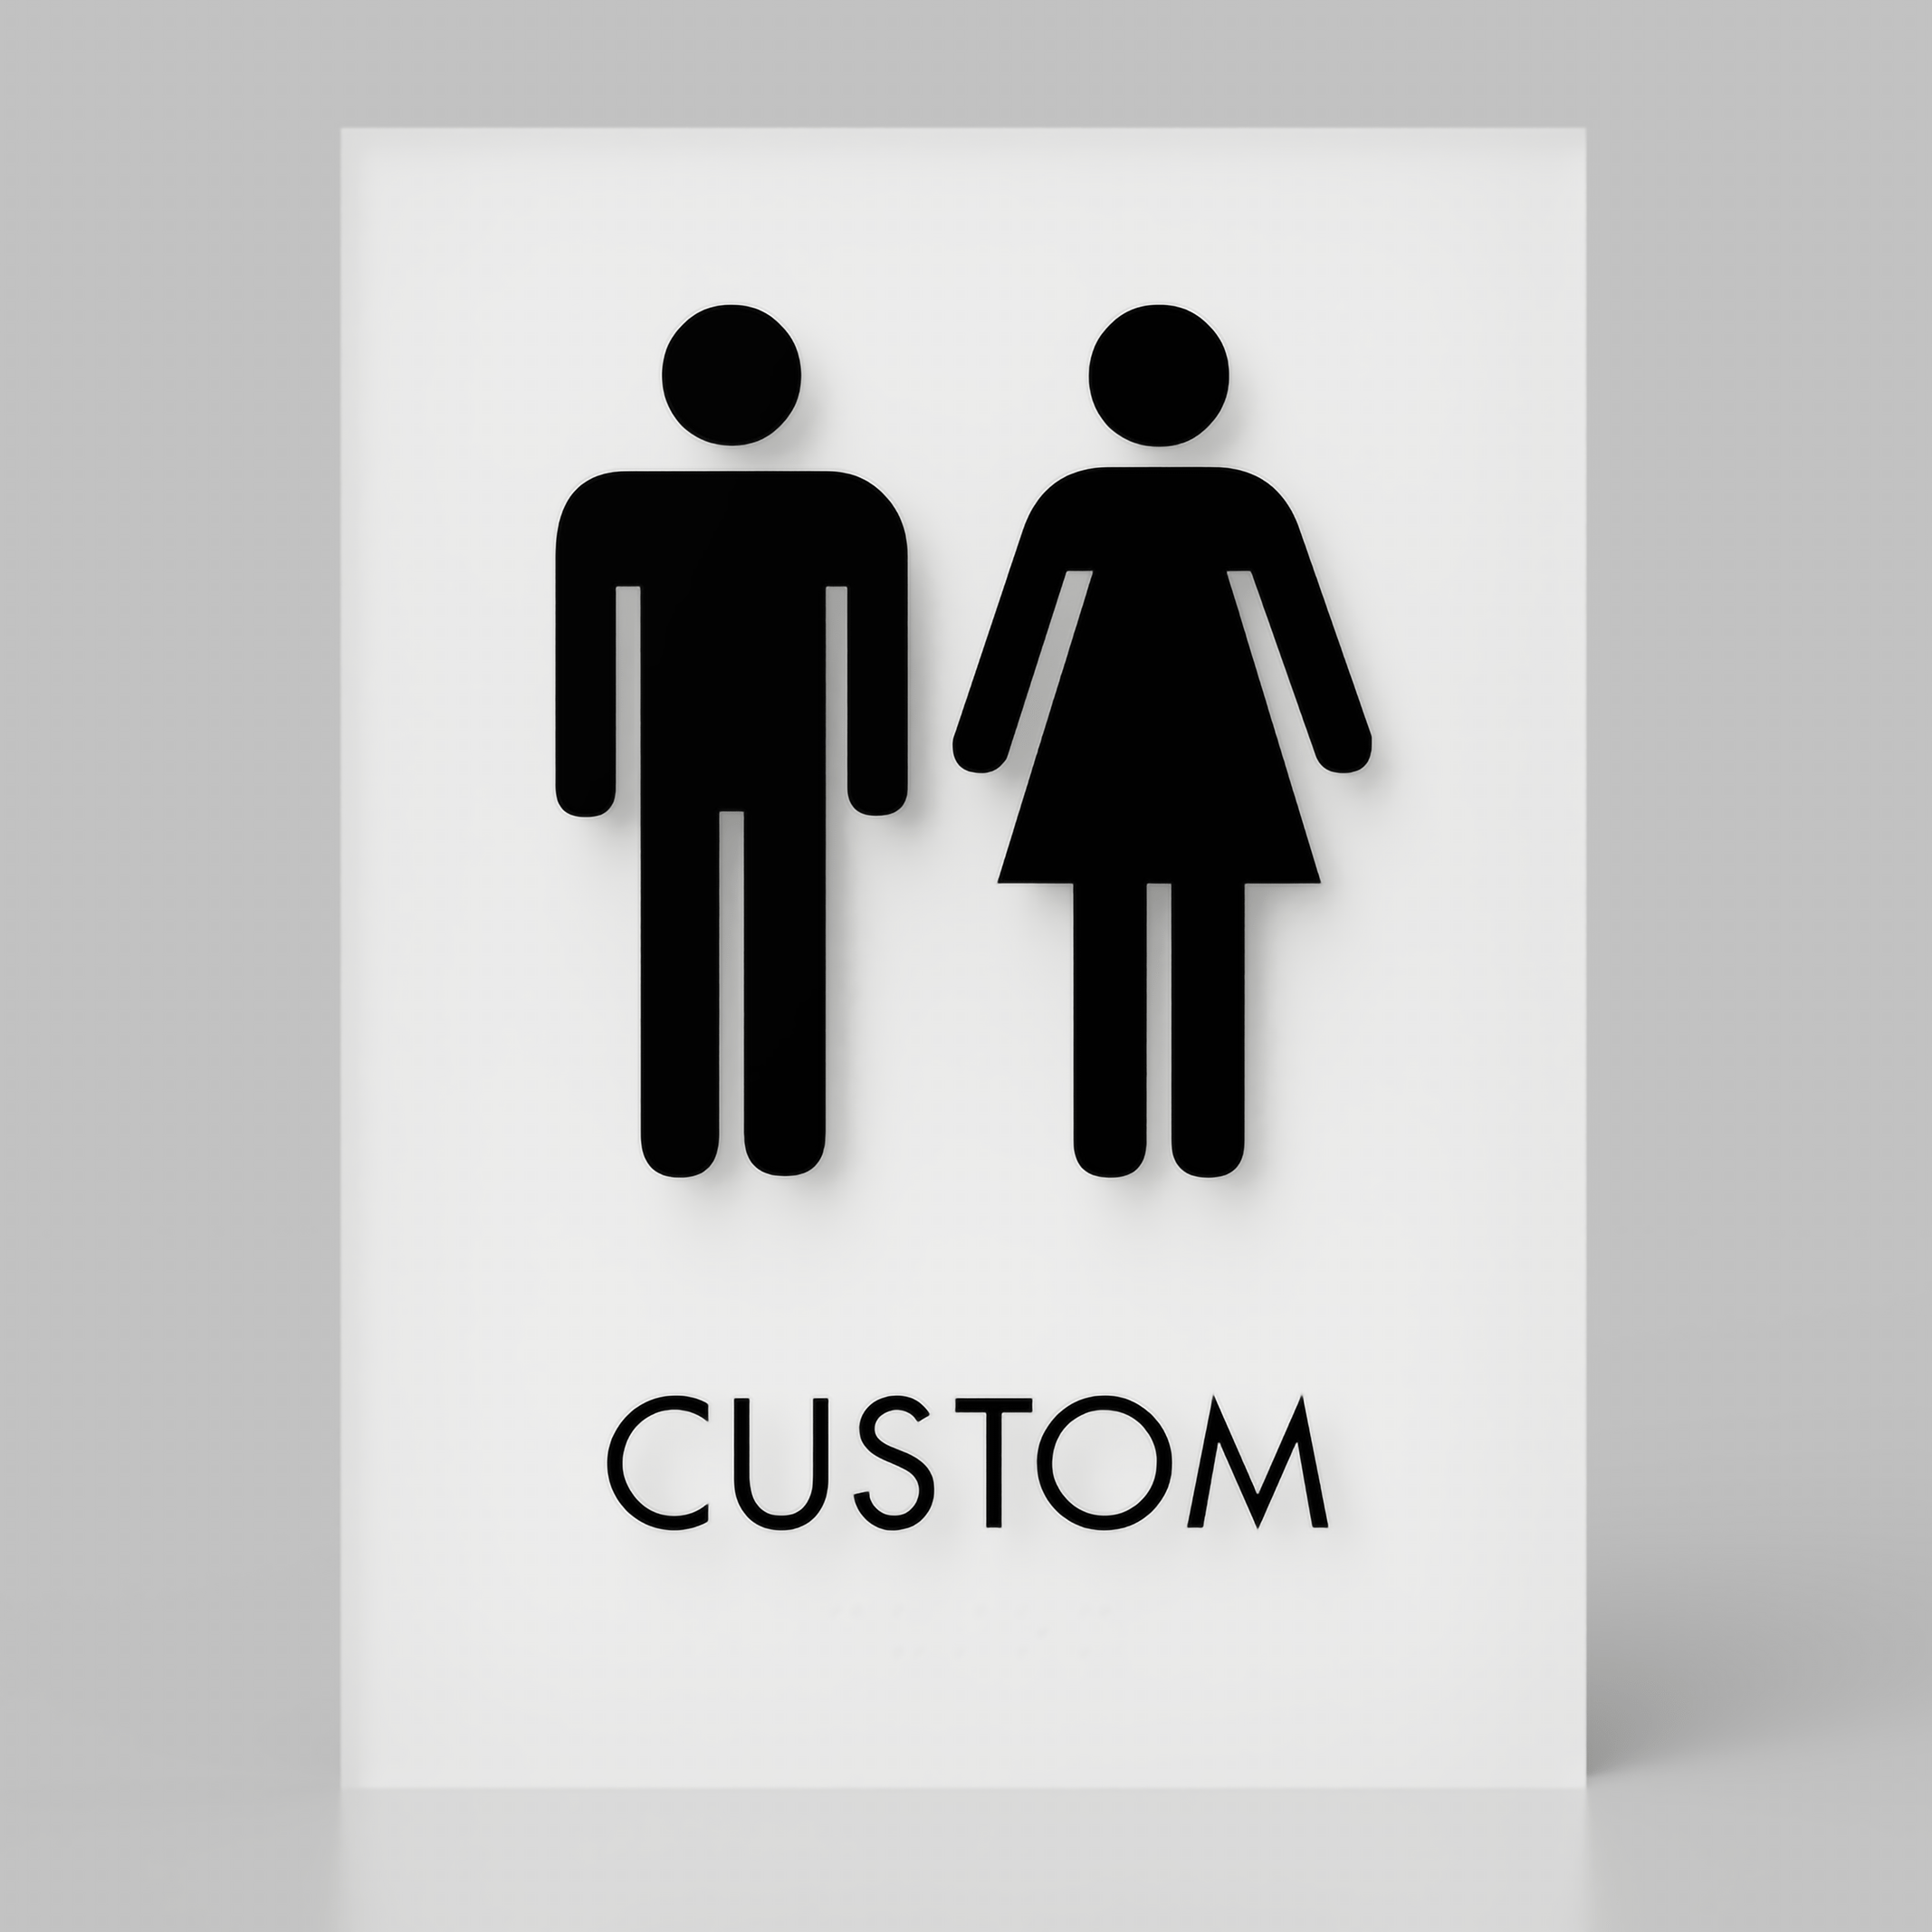 Harper Laine Shop Tier 1 - Acrylic White / 1/4" / Unisex Restroom ID A, Customizable 1 Line Text, 6″ x 8″, ADA, Reese Series